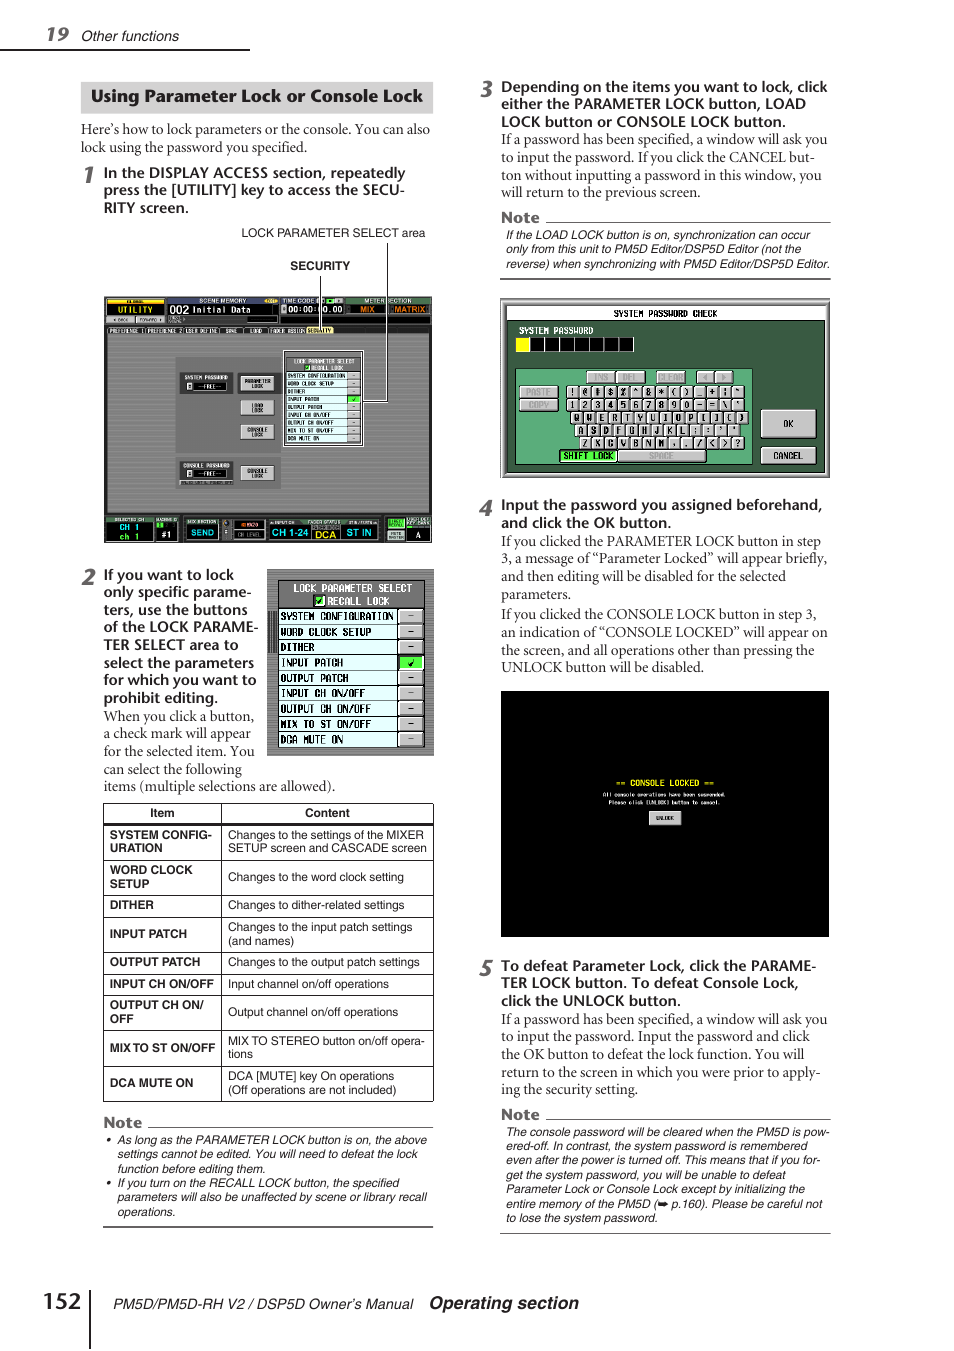 Using parameter lock or console lock | Yamaha DSP5D User Manual | Page 152 / 409